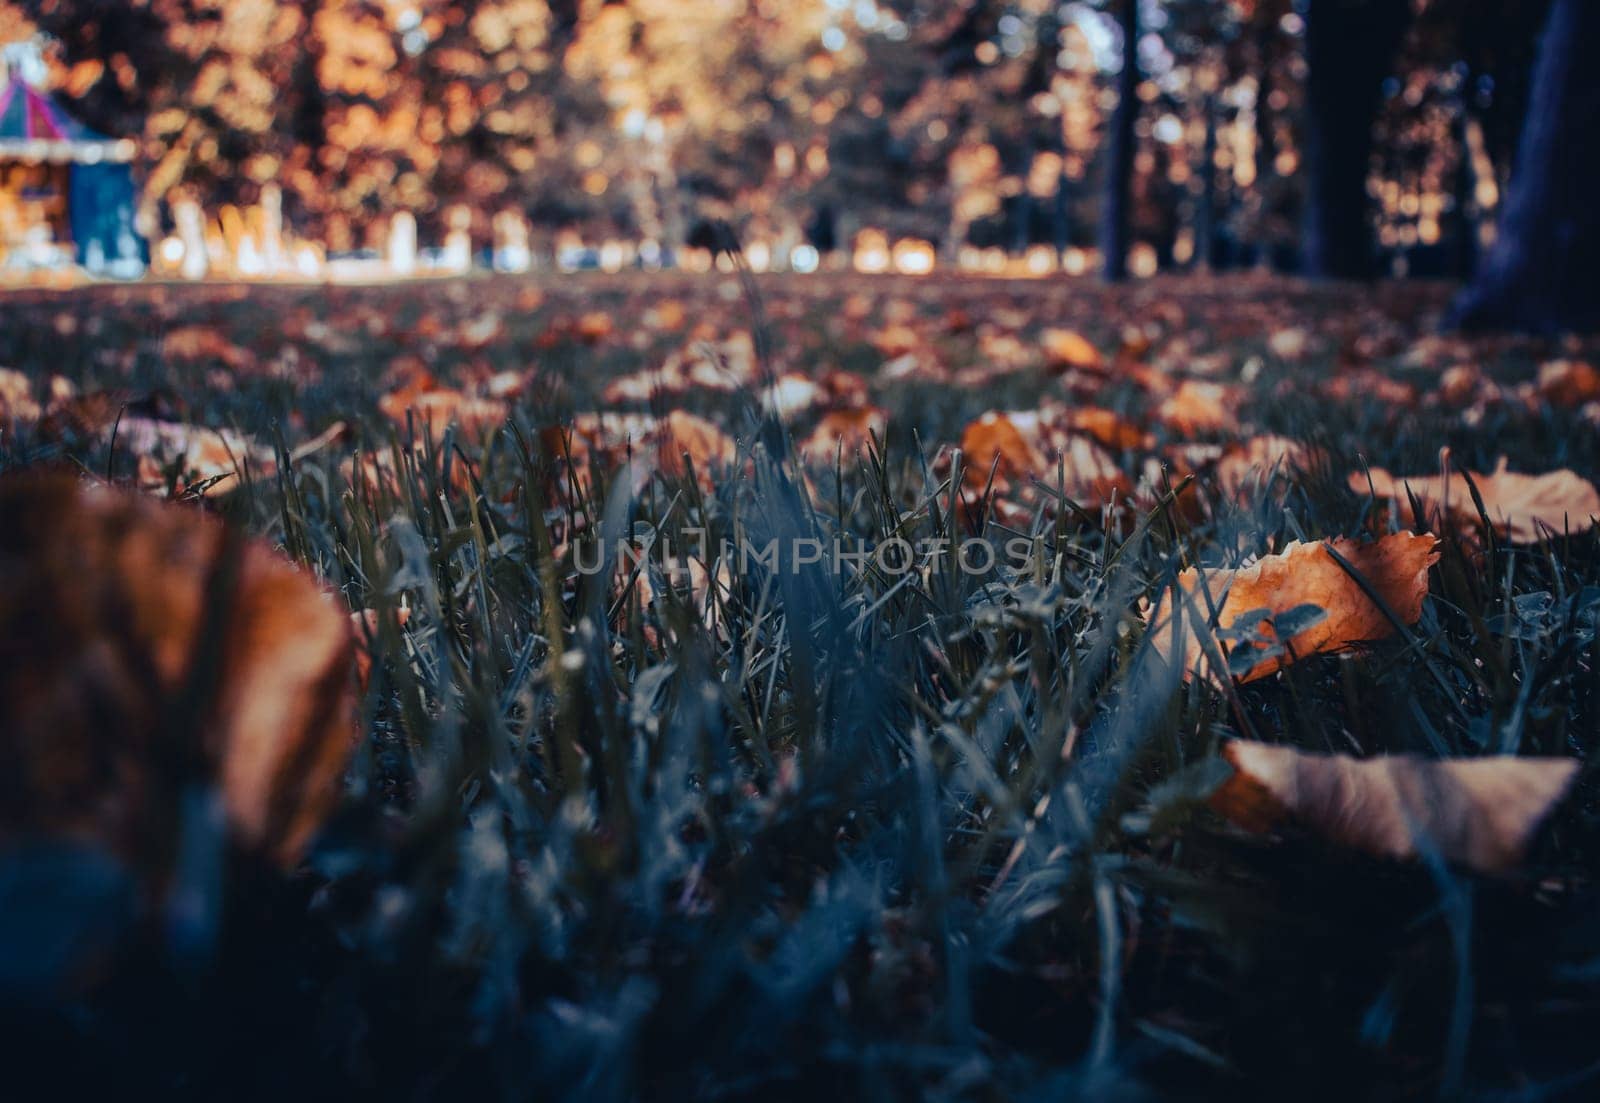 Close up fallen leaves on grass in park concept photo. Green grass and red leaves. Lawn - grass with leaves - autumn background. Beautiful nature scenery photography. High quality picture for wallpaper, travel blog.